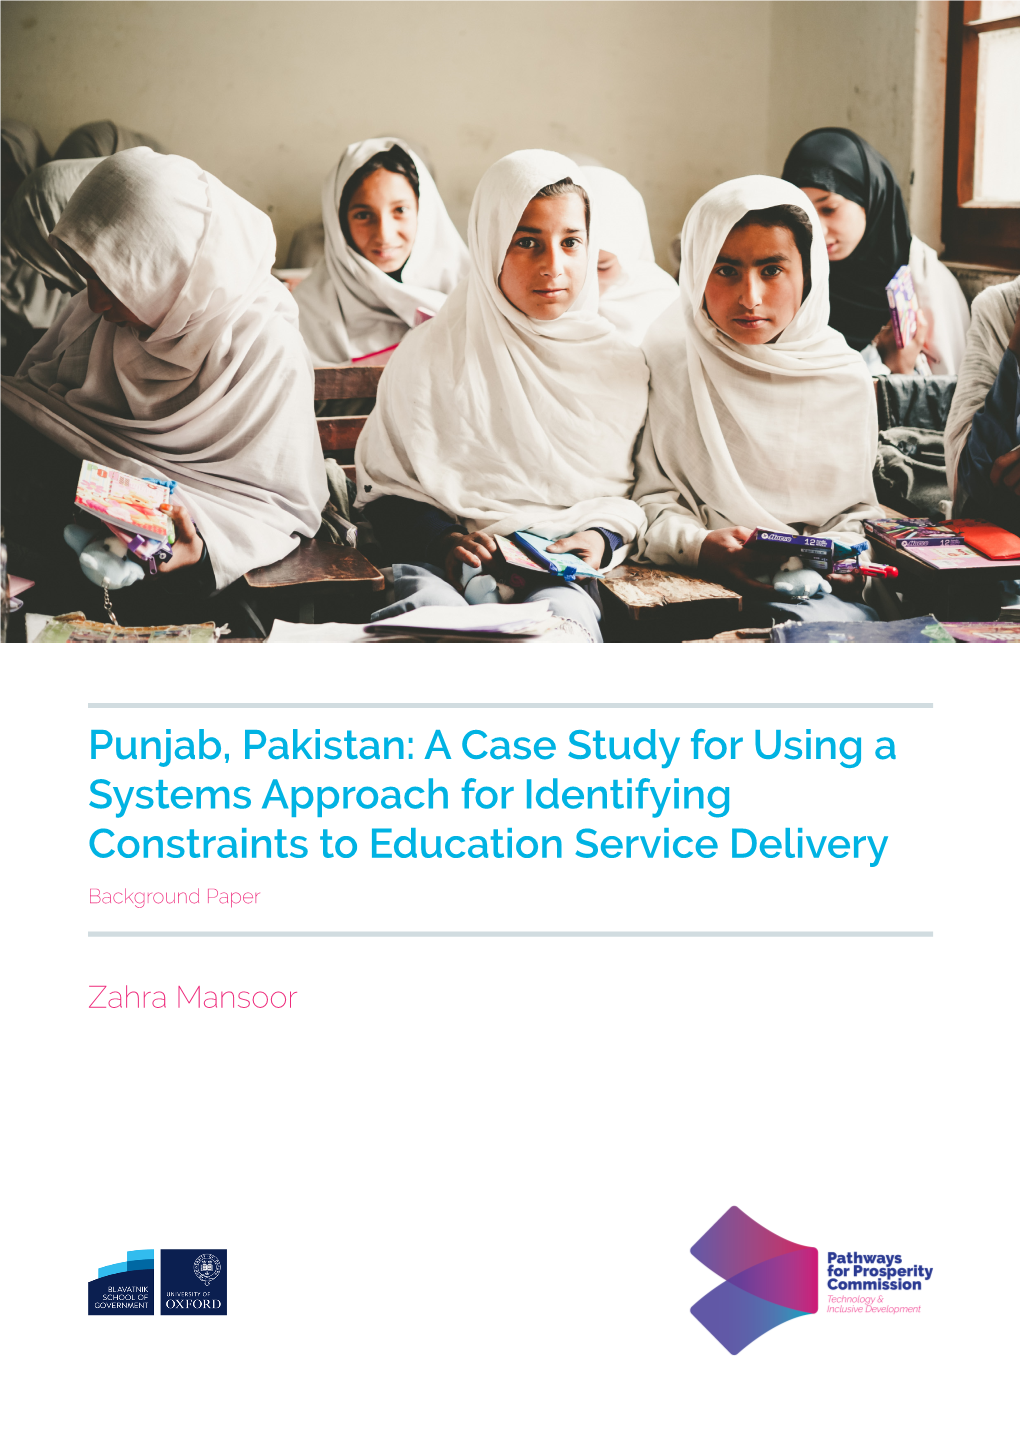 Punjab, Pakistan: a Case Study for Using a Systems Approach for Identifying Constraints to Education Service Delivery Background Paper